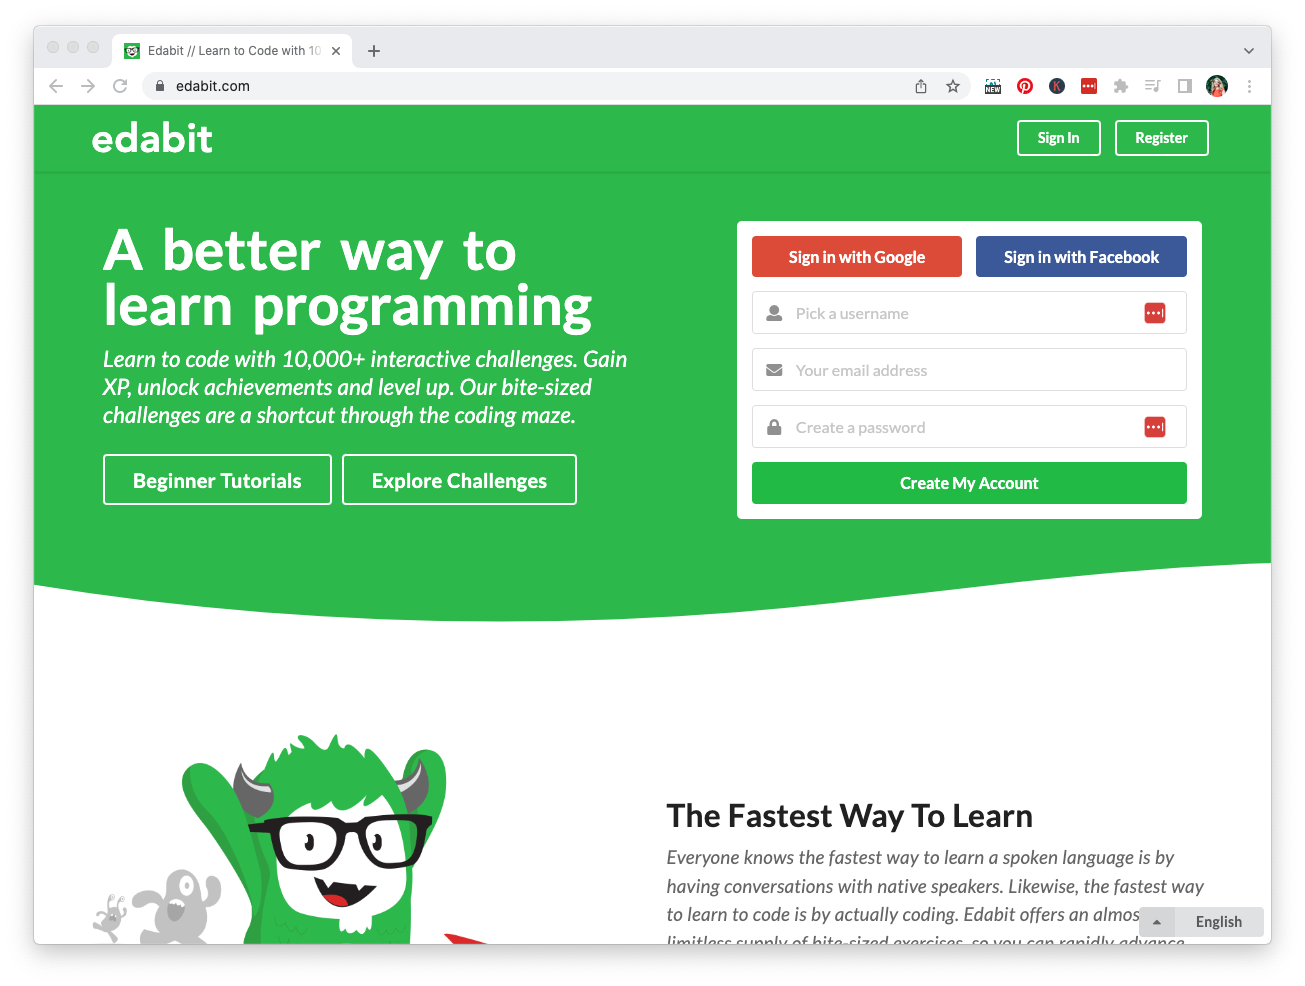 EdaBit, the better way to learn programming